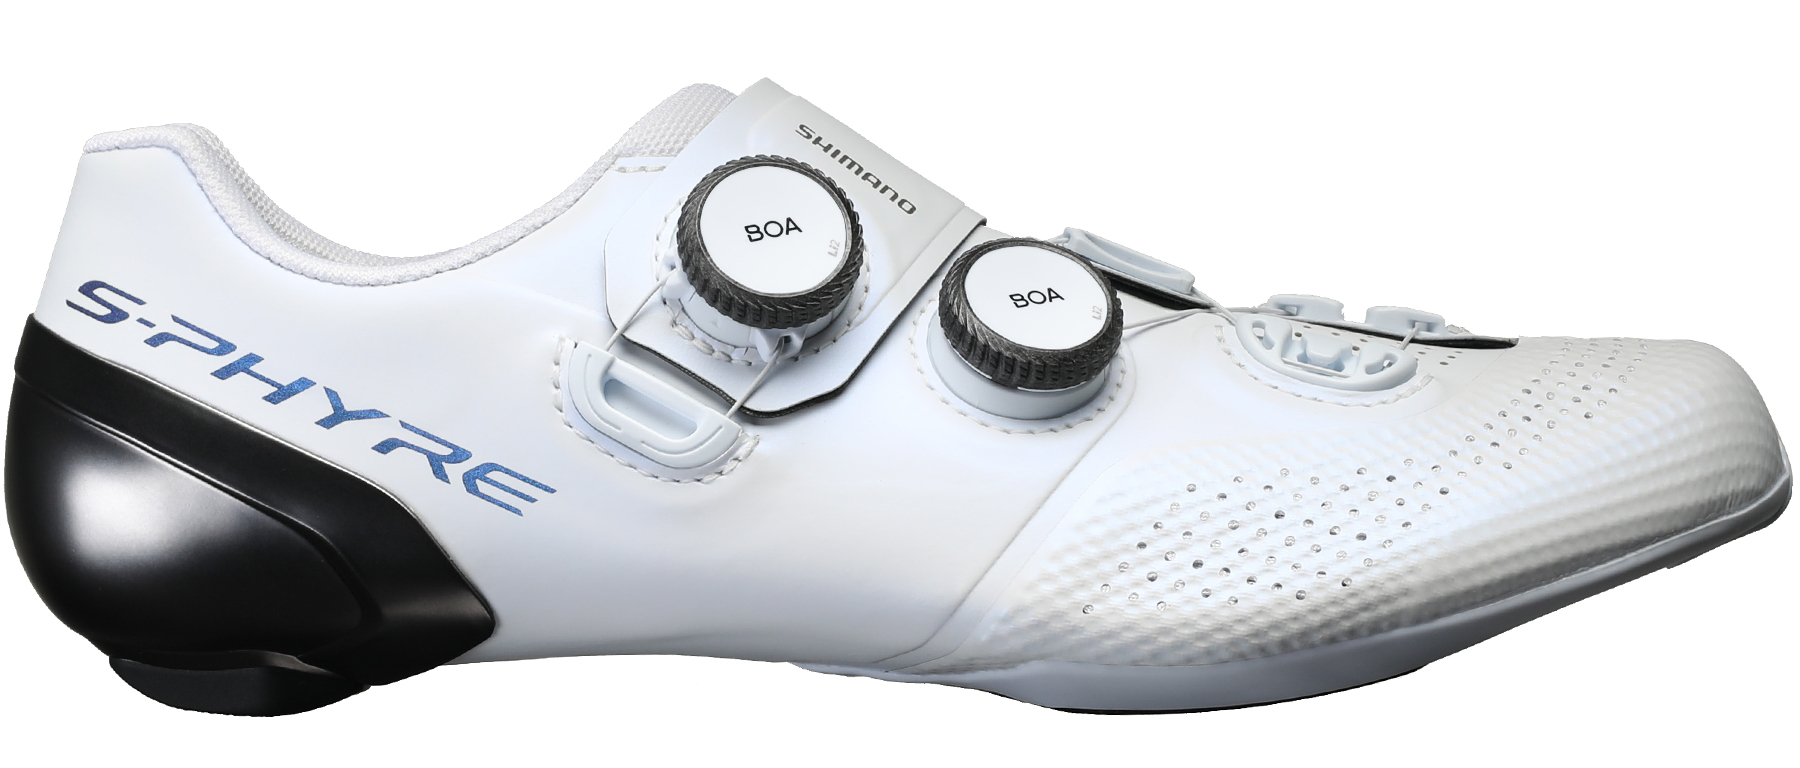 Shimano SH-RC902 S-Phyre Wide Road Shoes